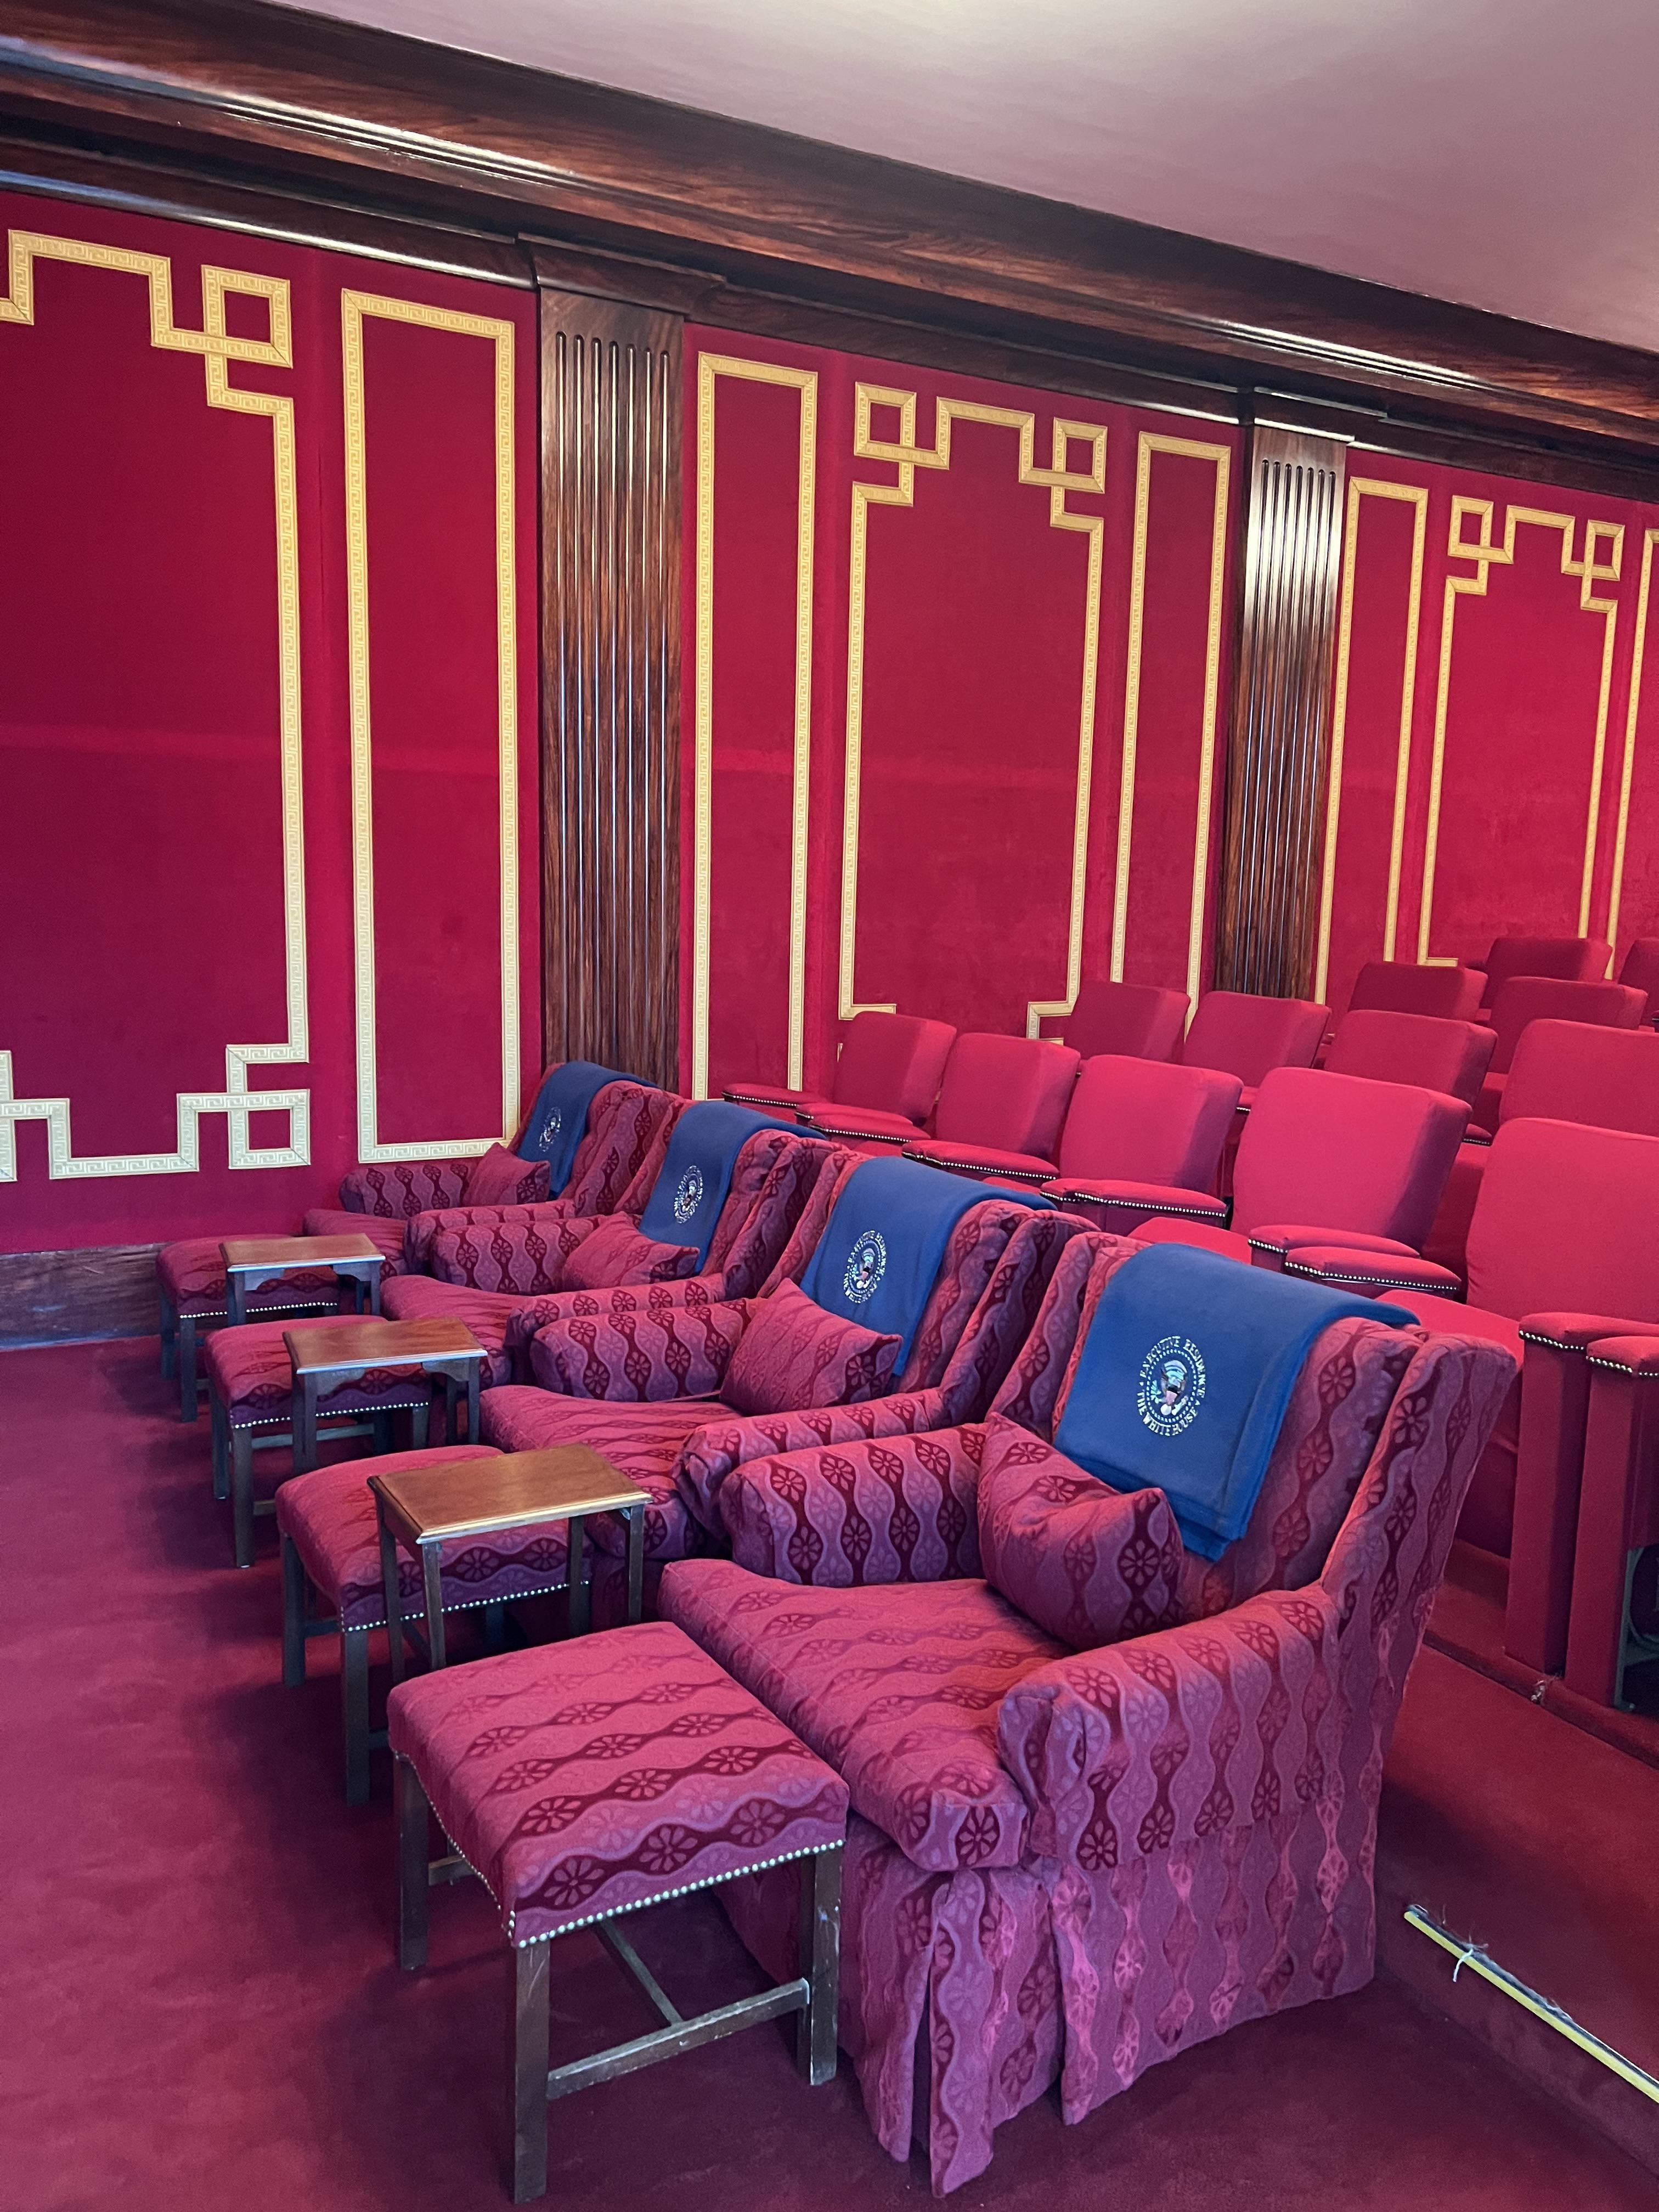 Red rug and rows of seats; the first row has footrests/ottoman tables and presidential seals on the top of the chair